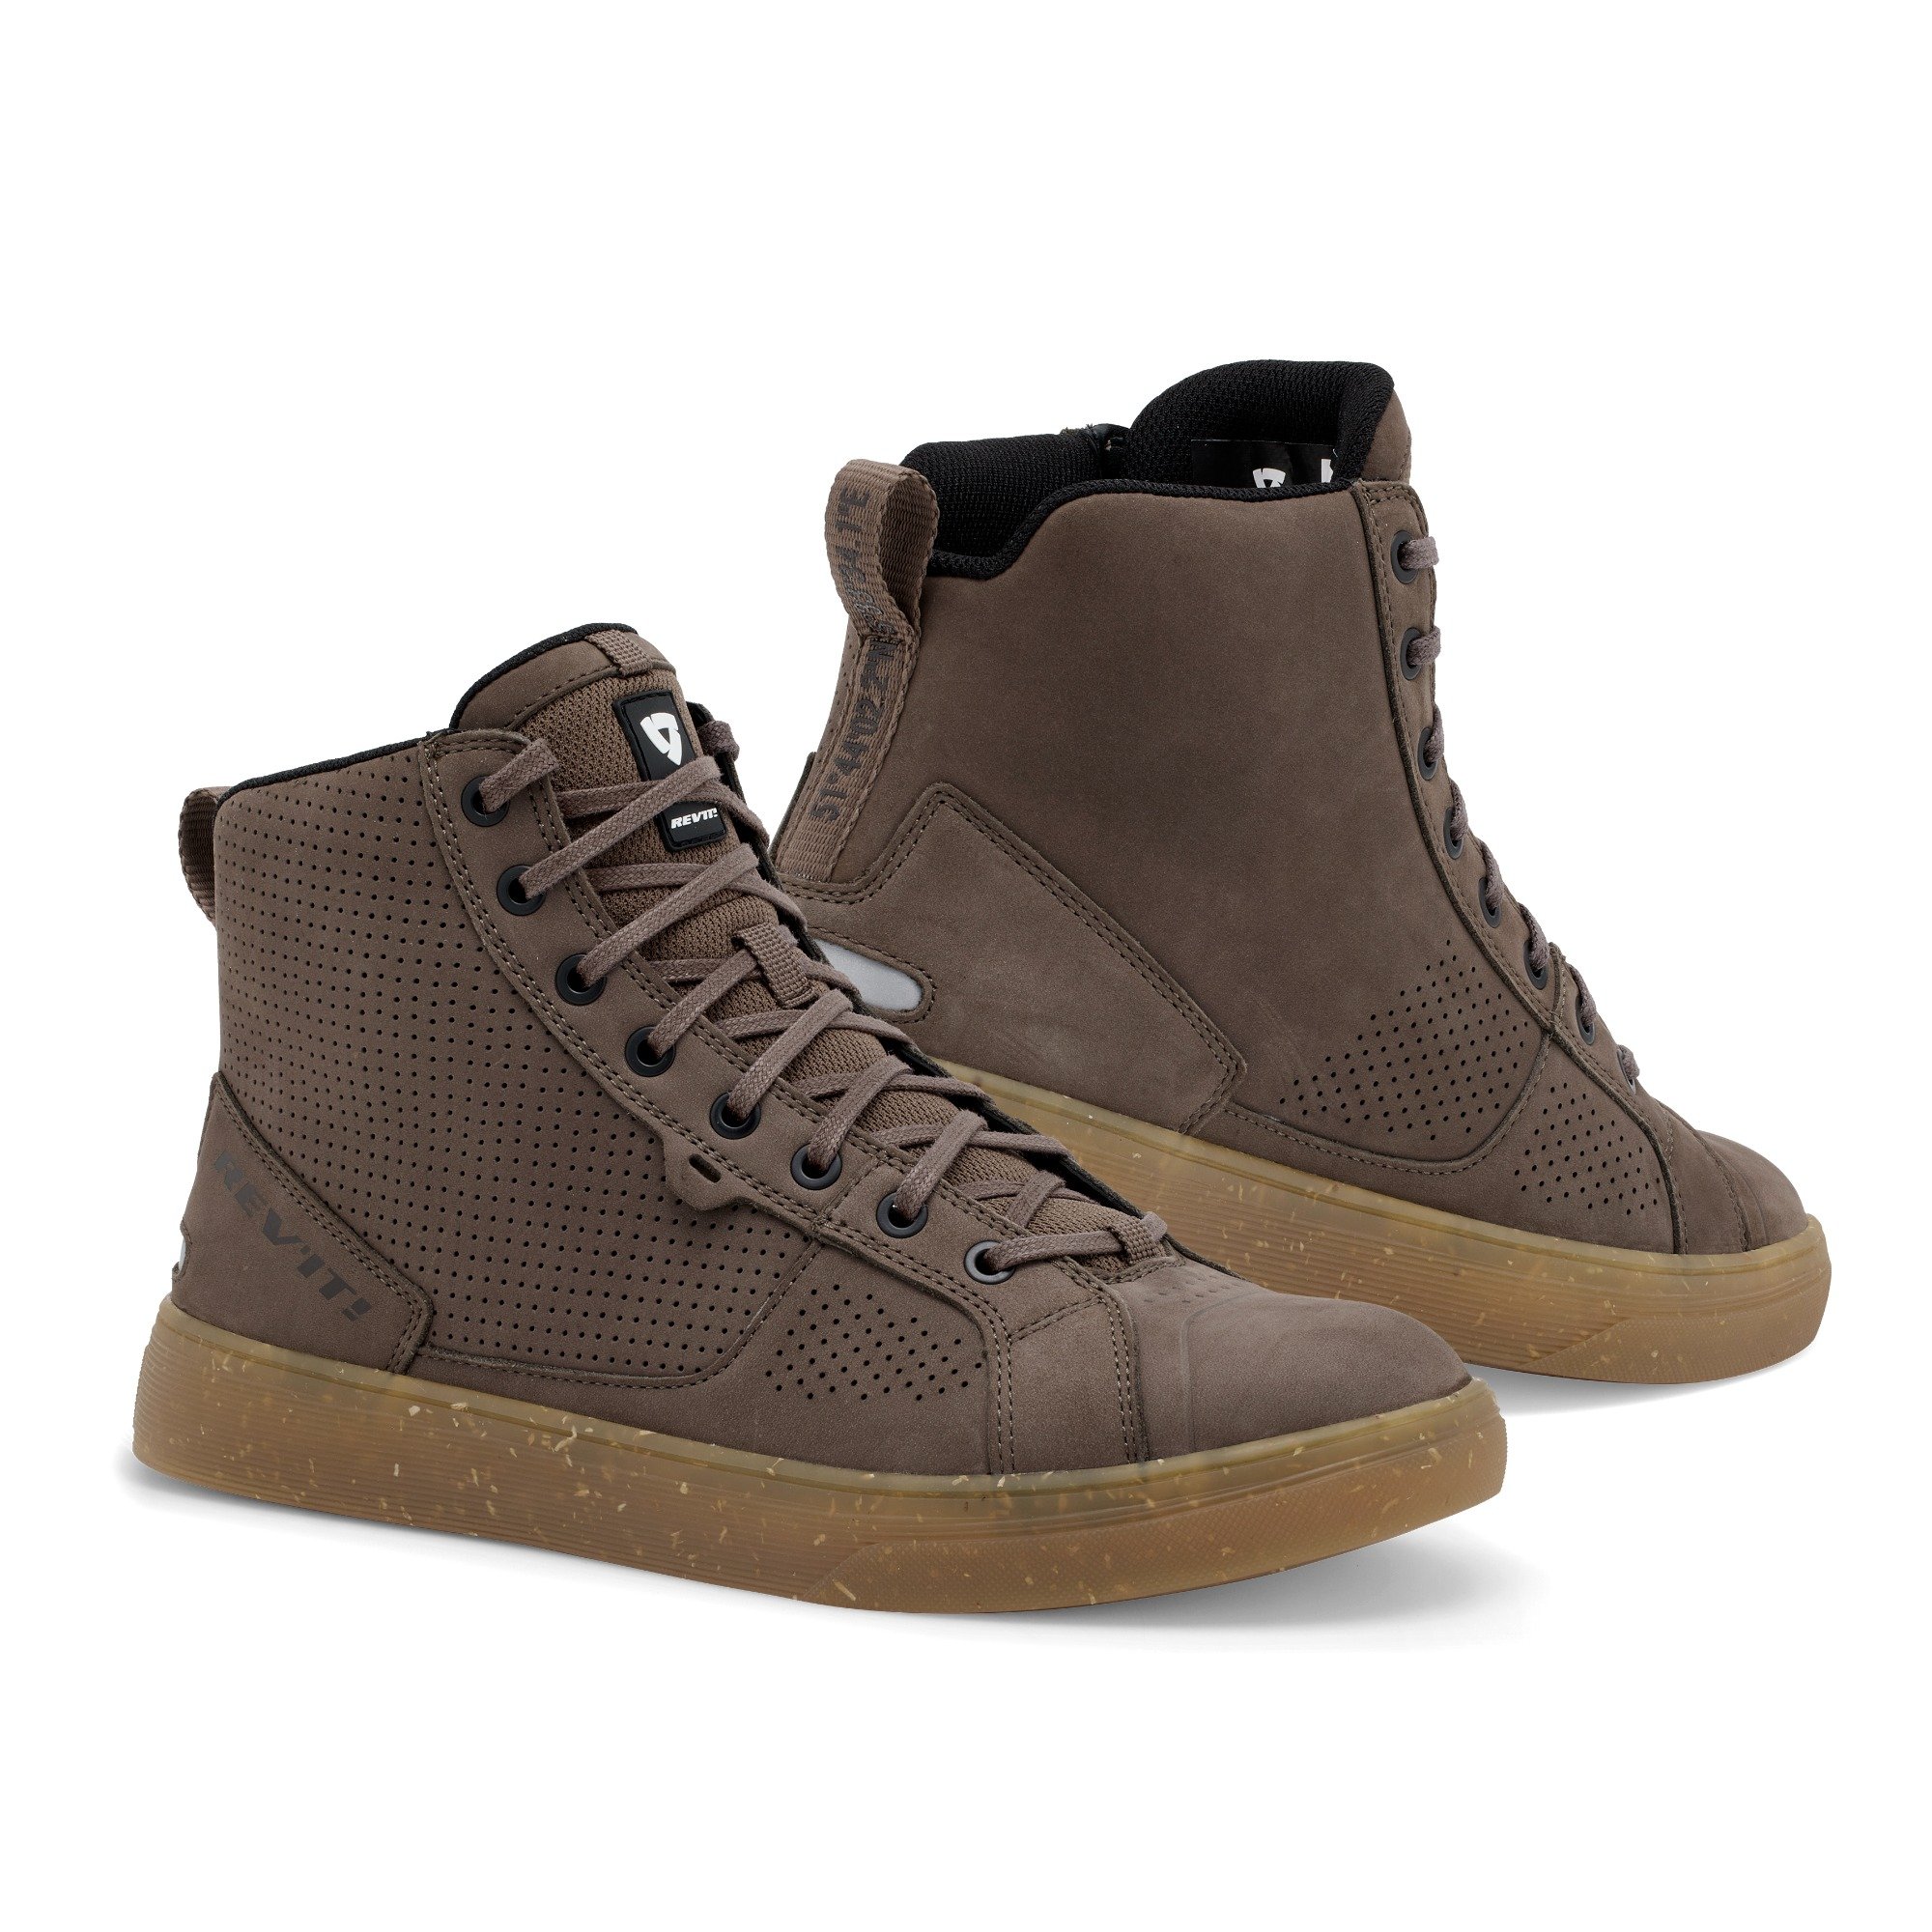 Image of EU REV'IT! Arrow Chaussures Taupe Marron Taille 47